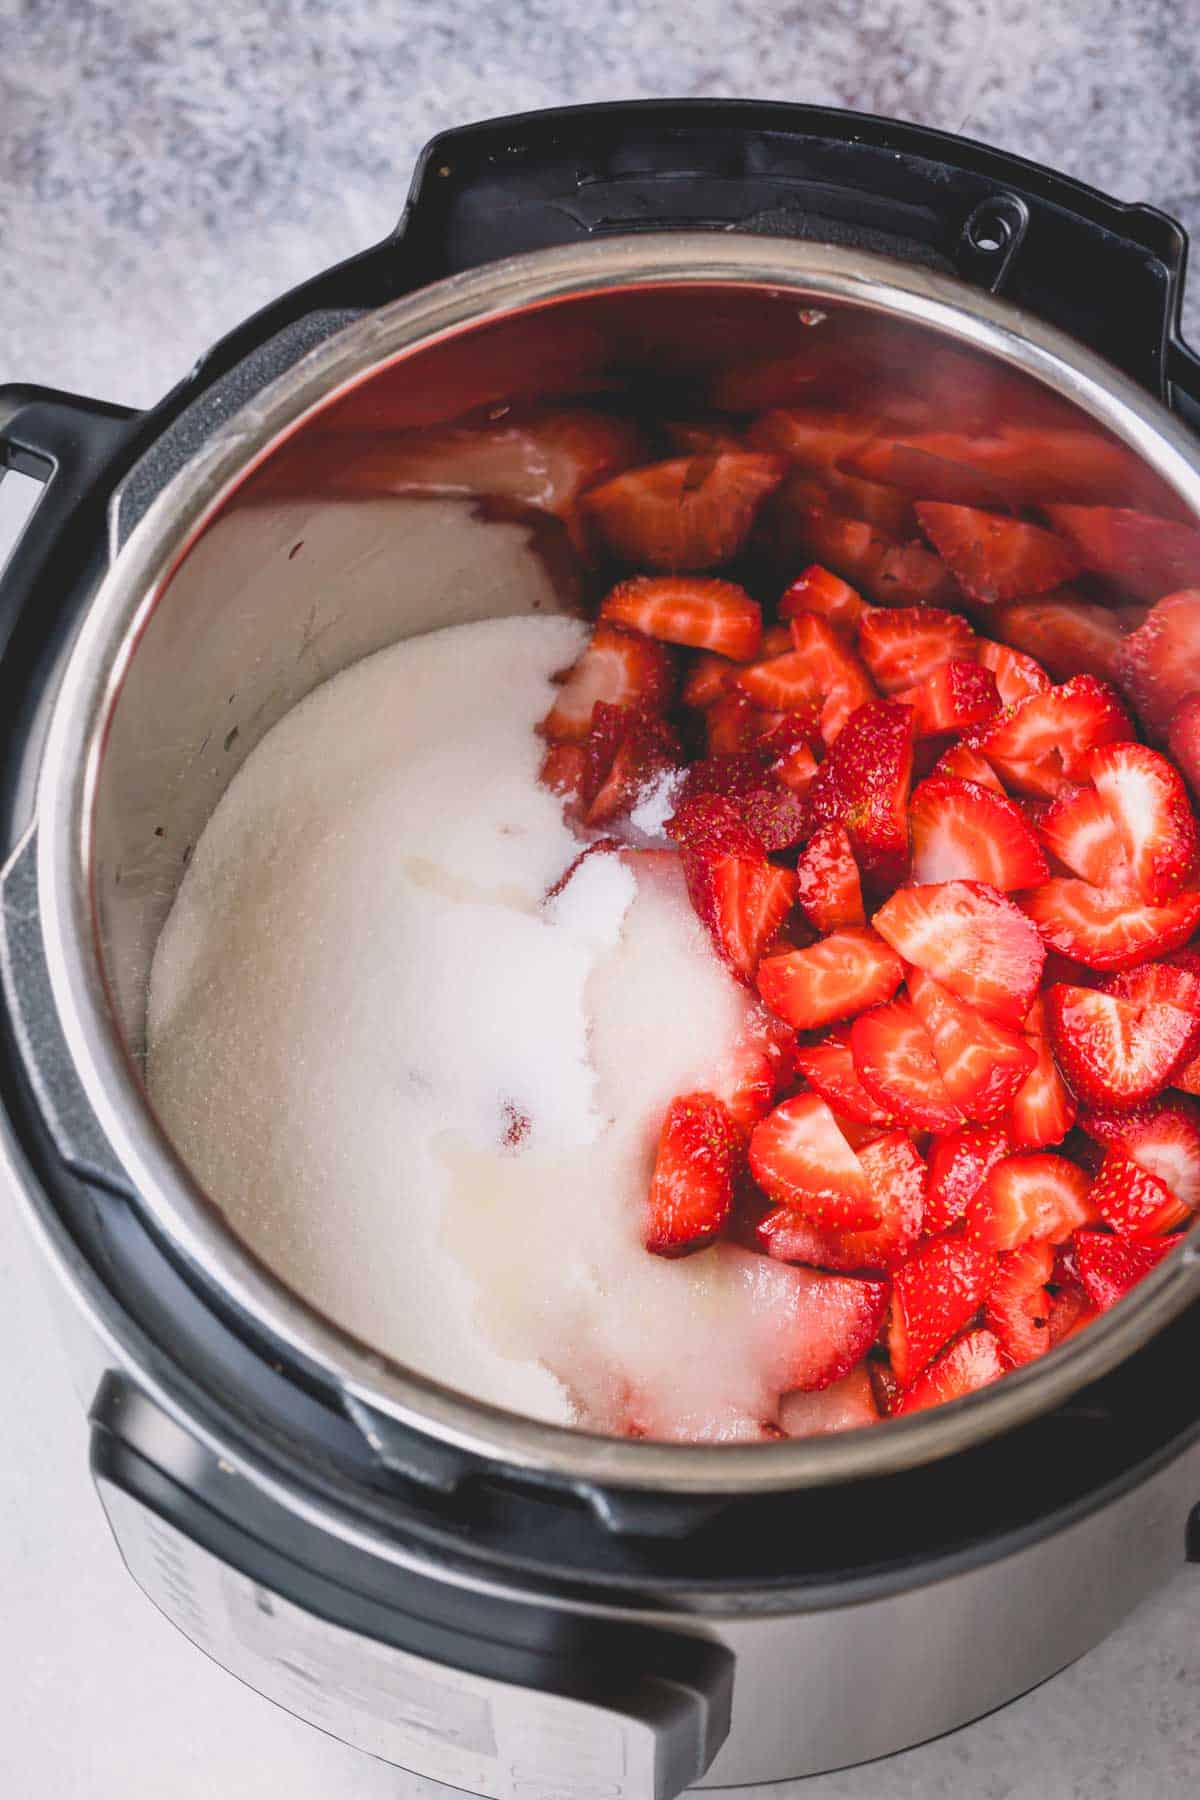 Sliced strawberries with sugar in an Instant pot.